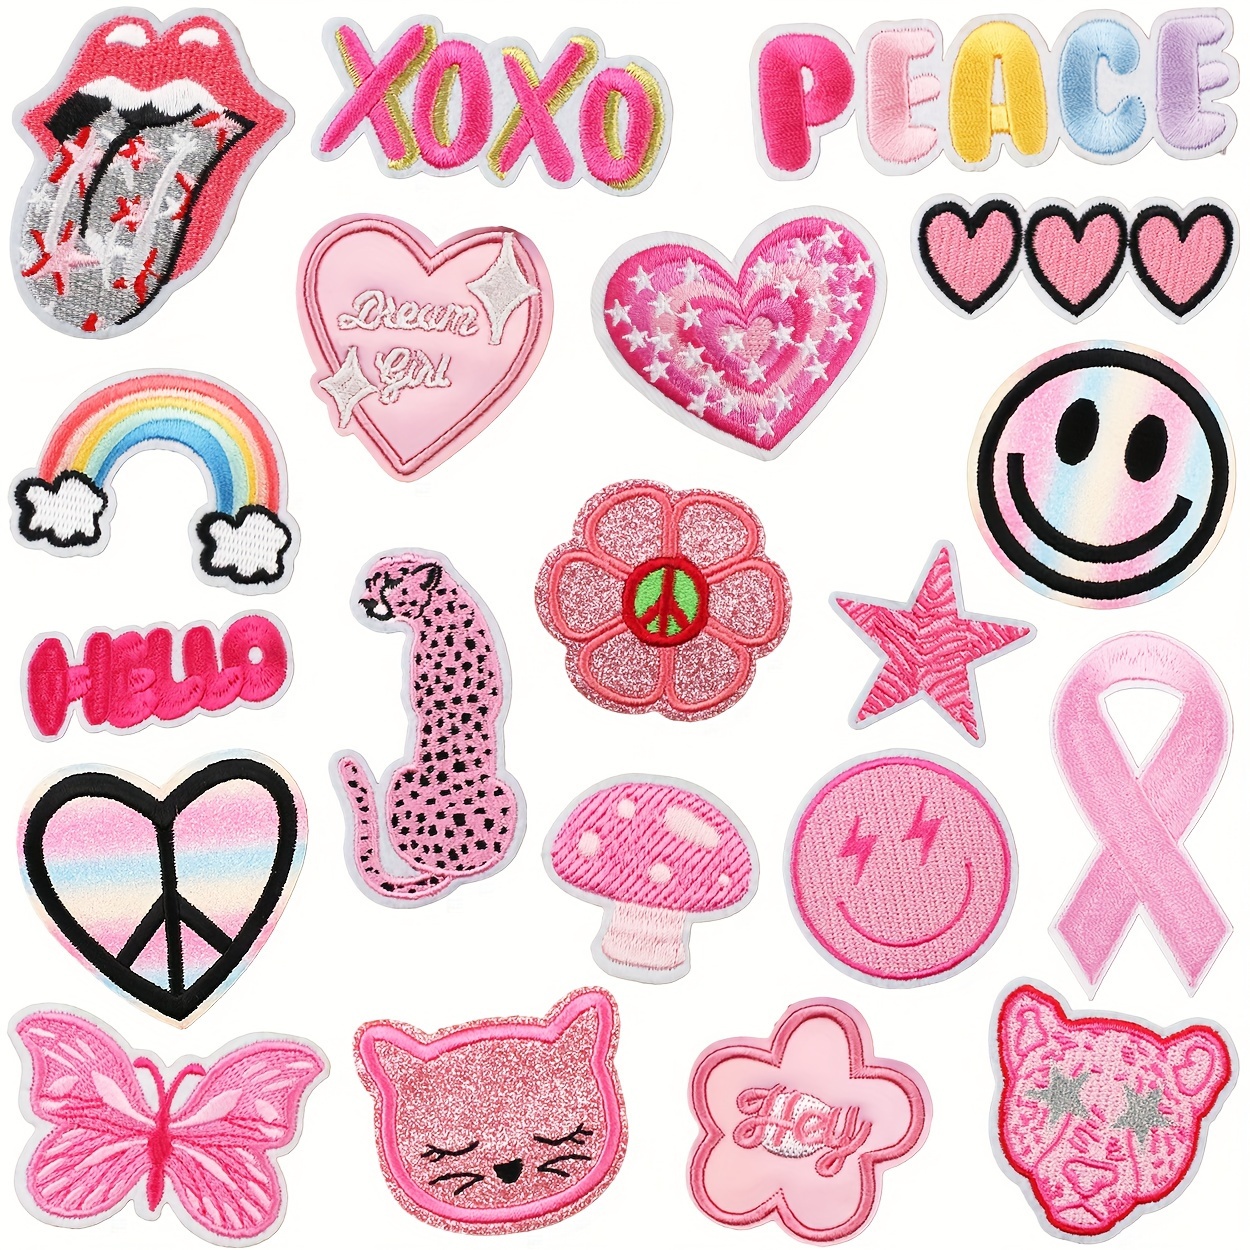 16pcs Cute Cartoon Iron On Patches For DIY Clothing Projects And Gifts